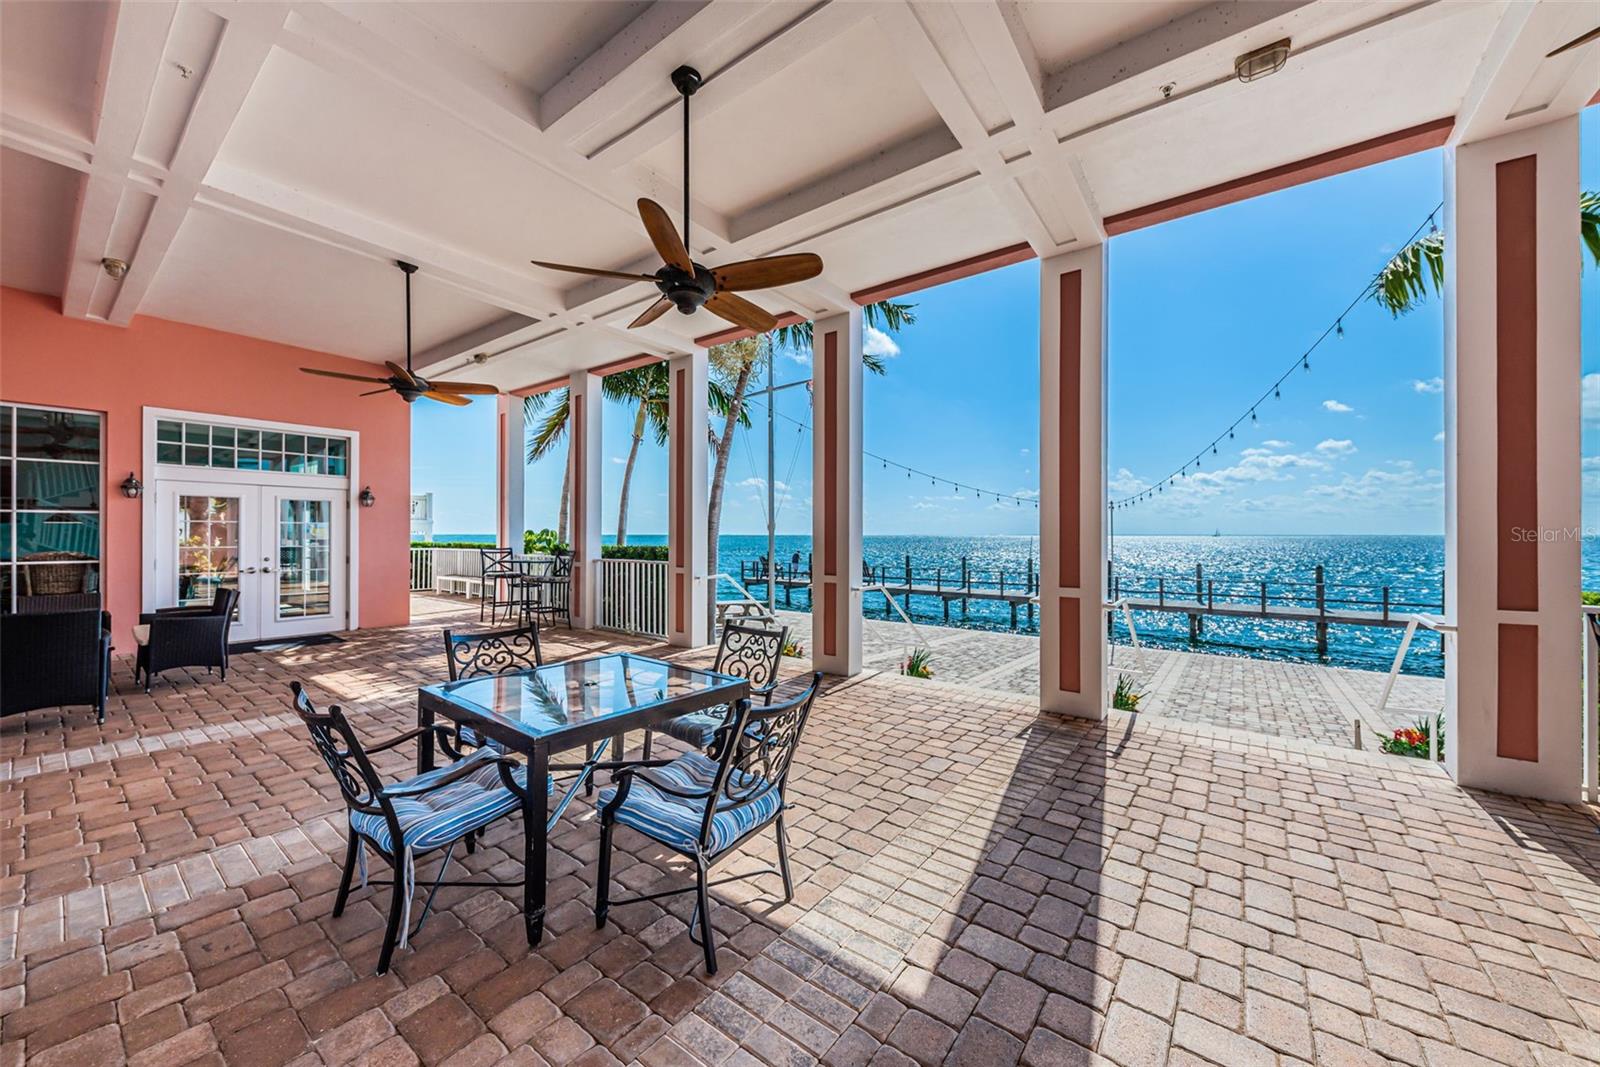 Yacht club downstairs patio overlooking Tampa Bay